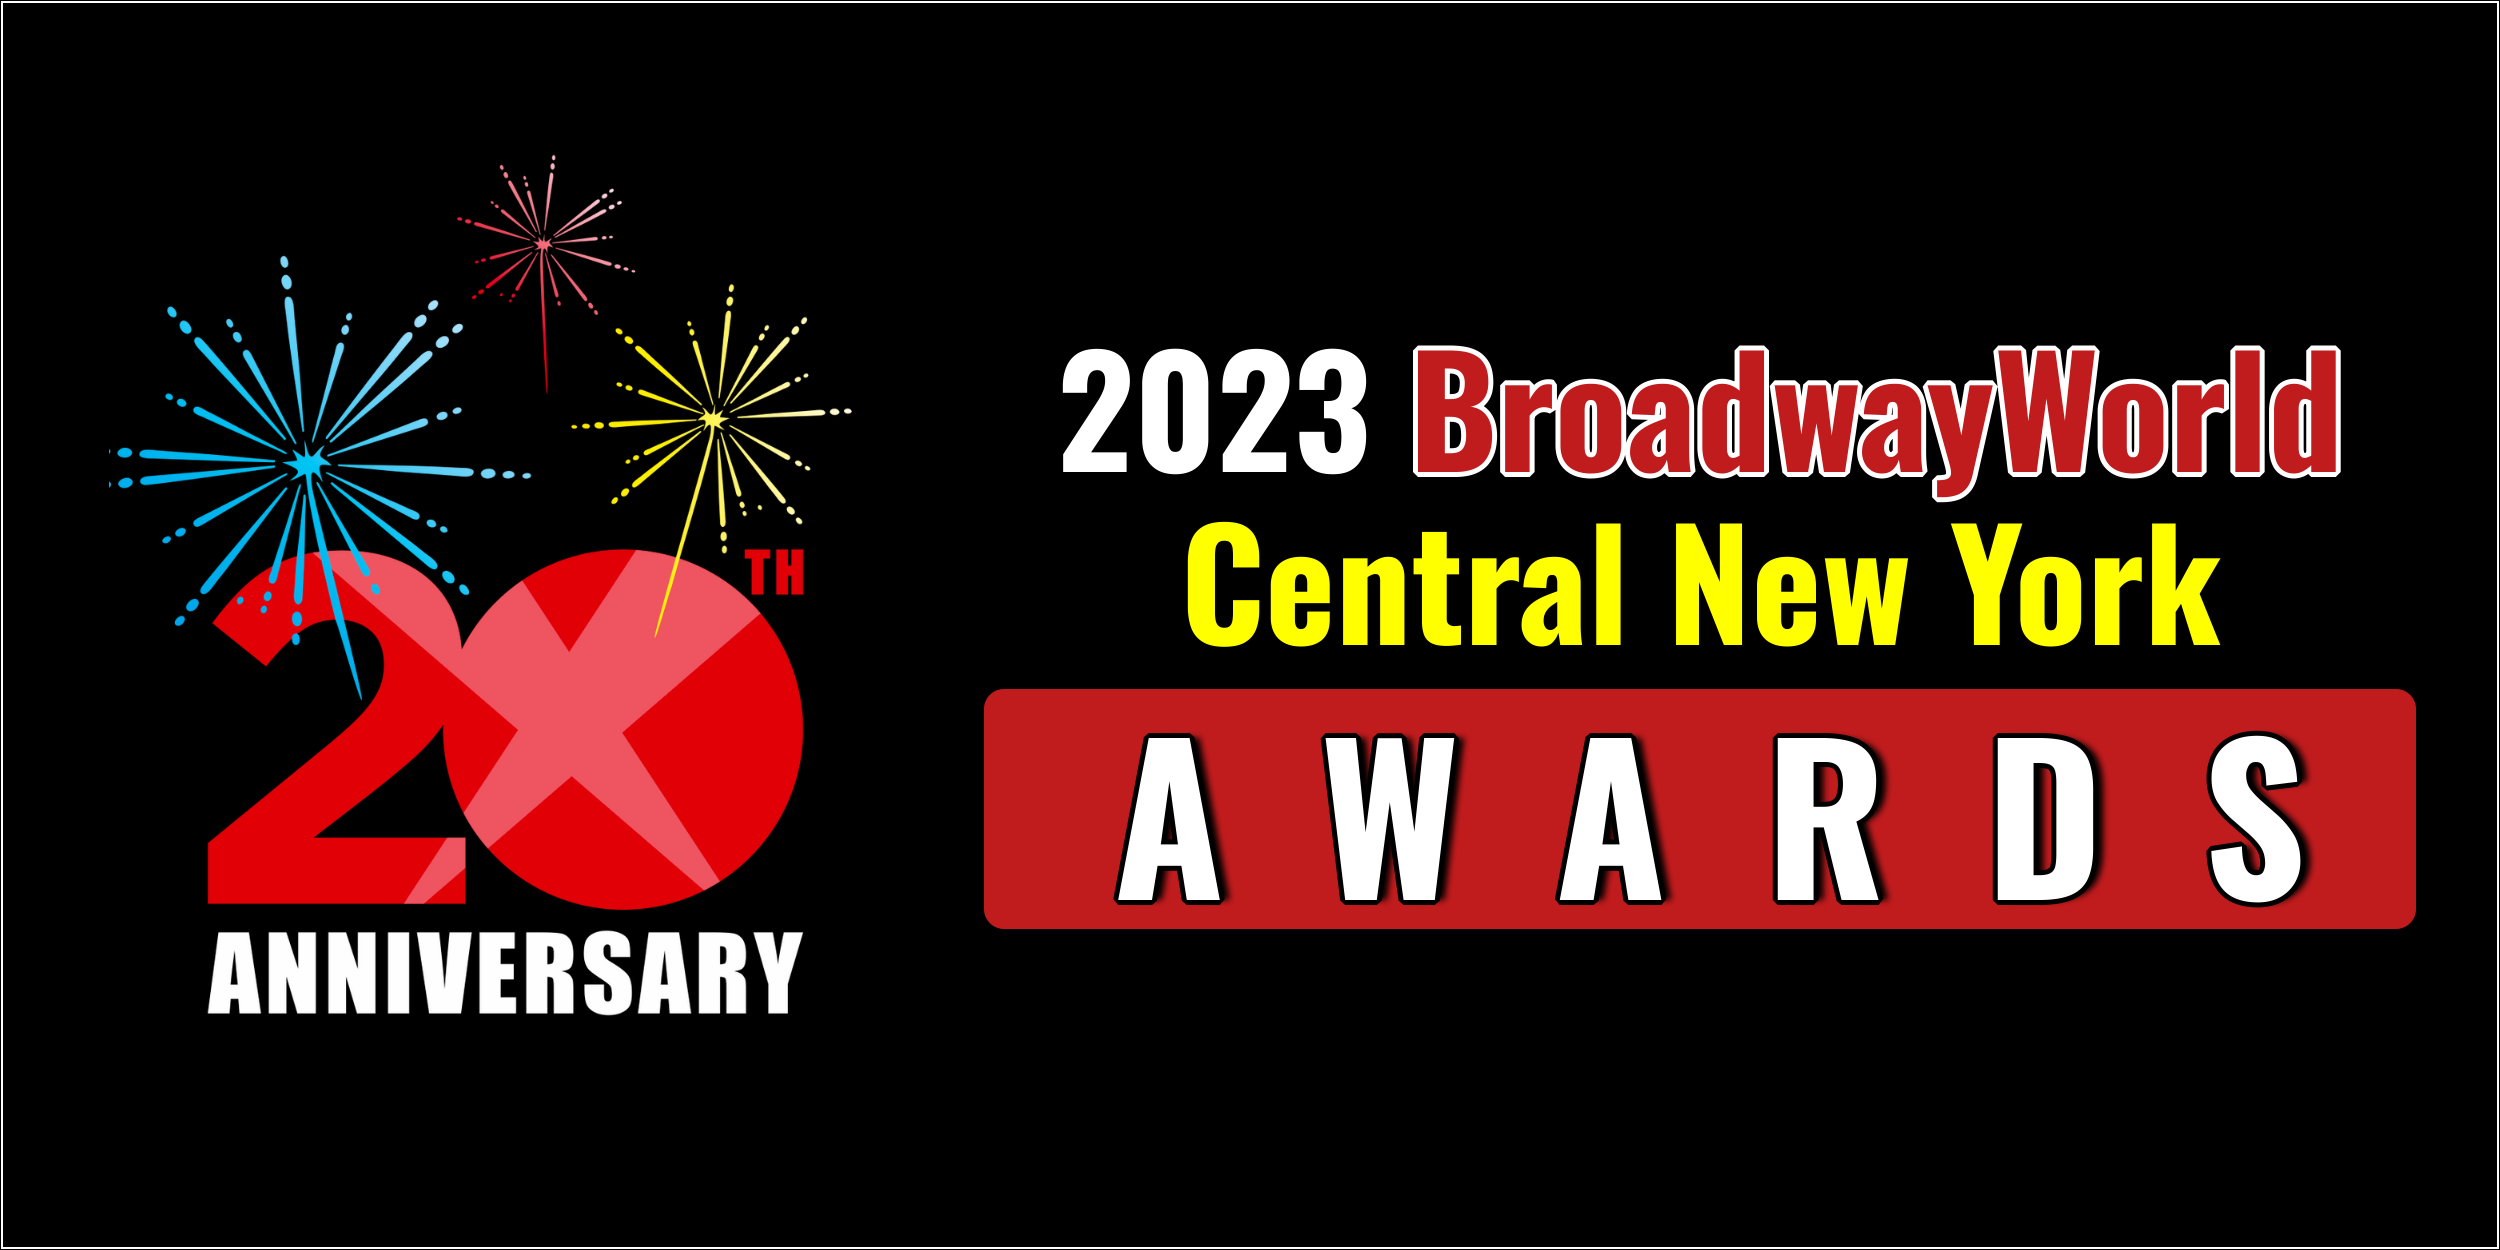 Latest Standings Announced For The 2023 BroadwayWorld Central New York Awards;  Leads Favo Photo